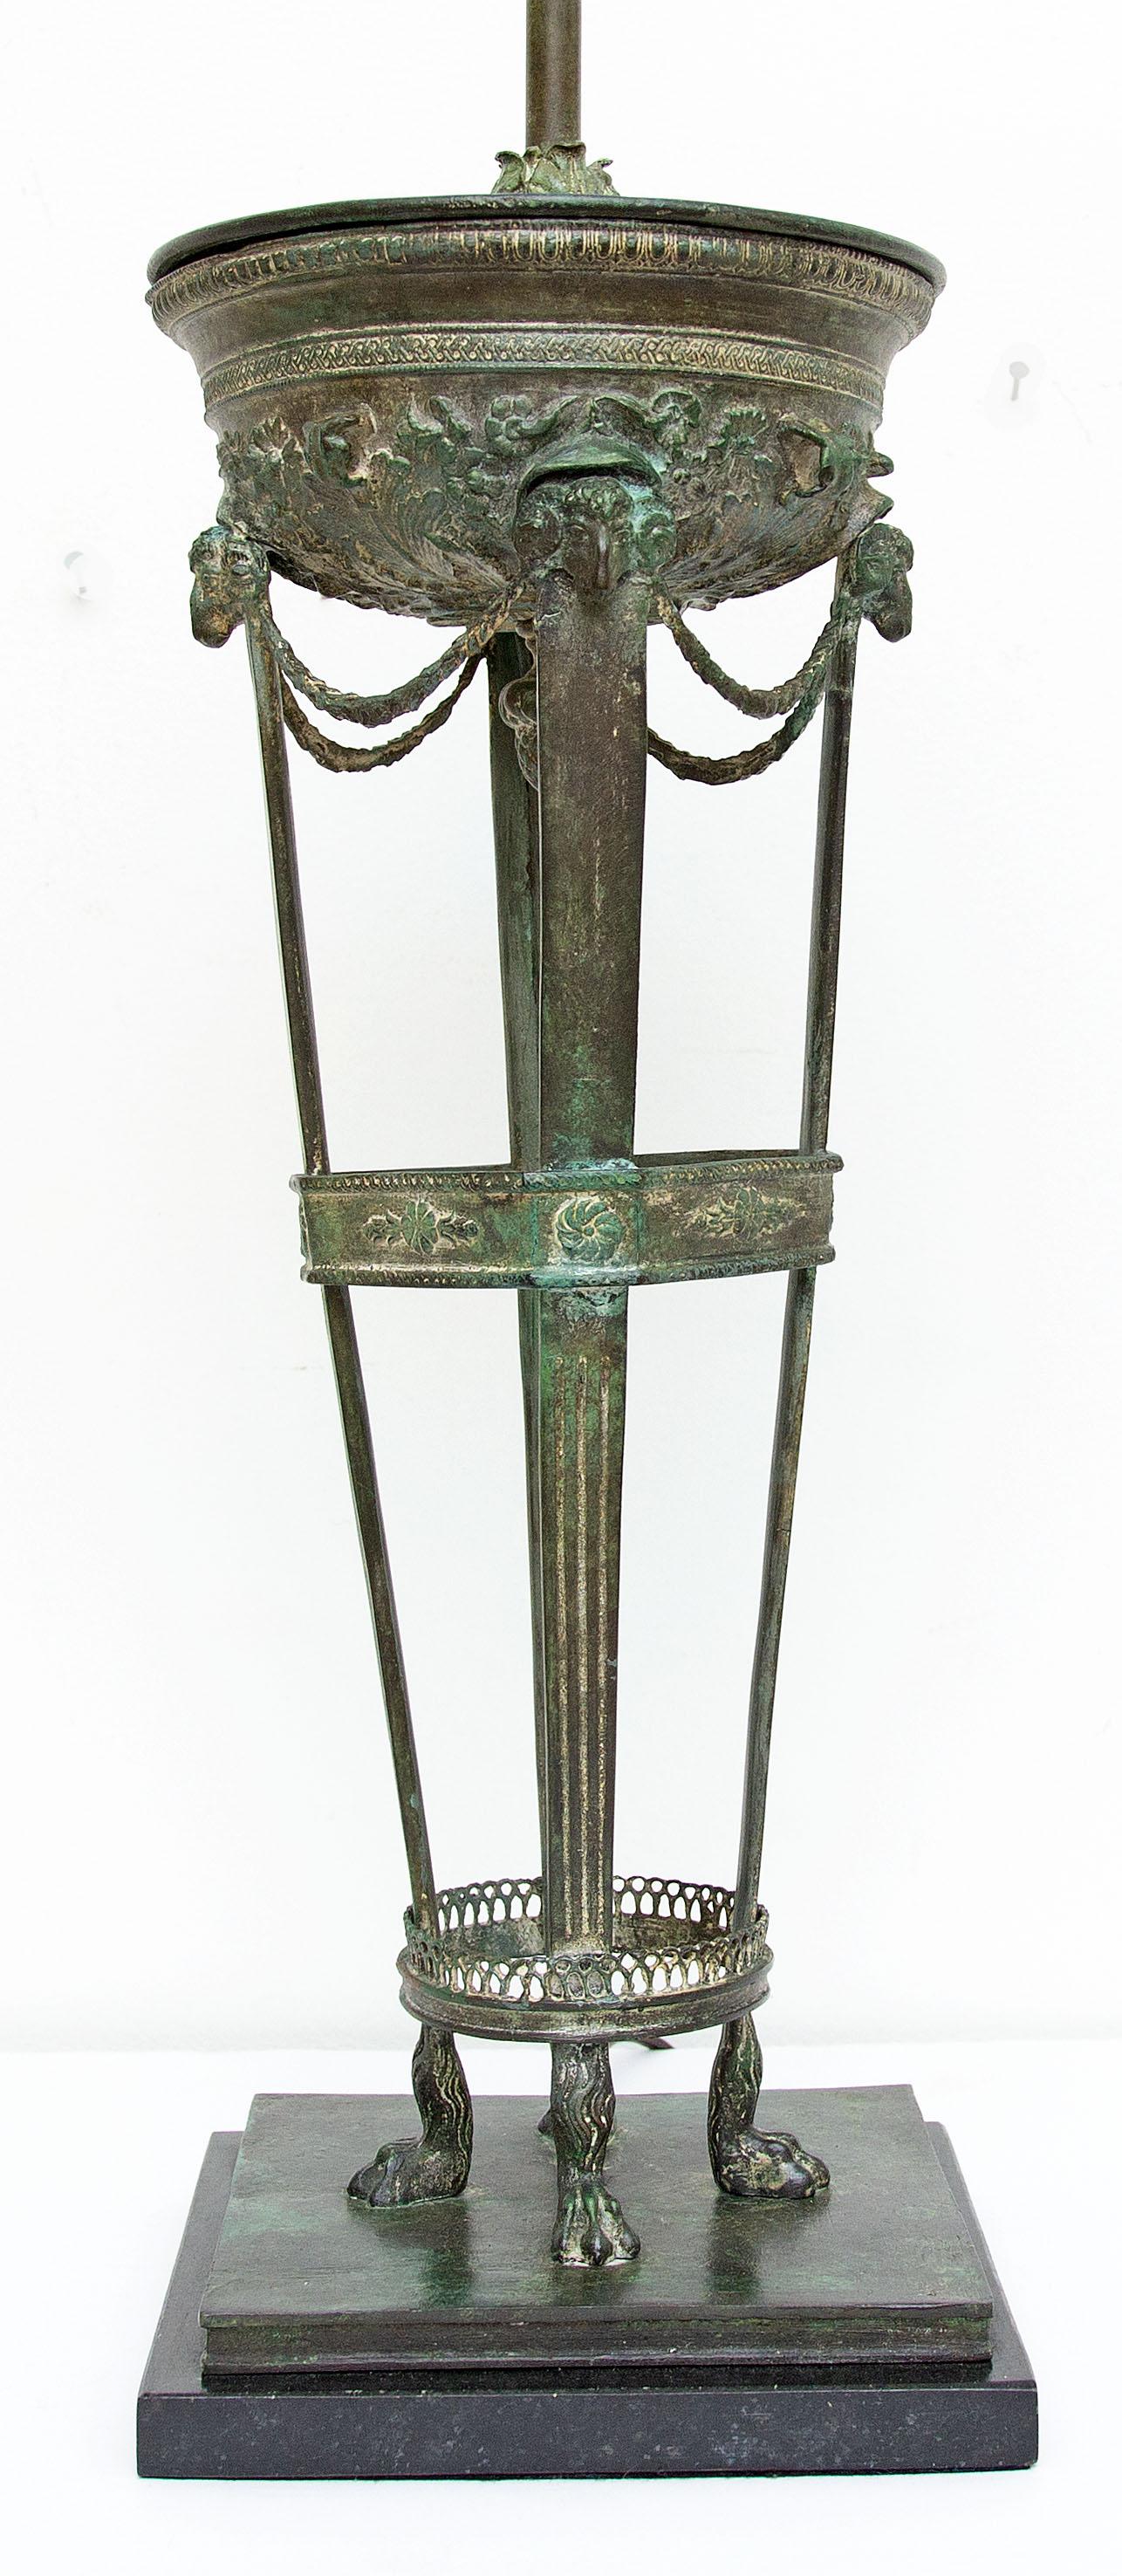 Vintage patinated bronze and marble grand tour style lamp. Antique verdigris finish, mid-20th century.